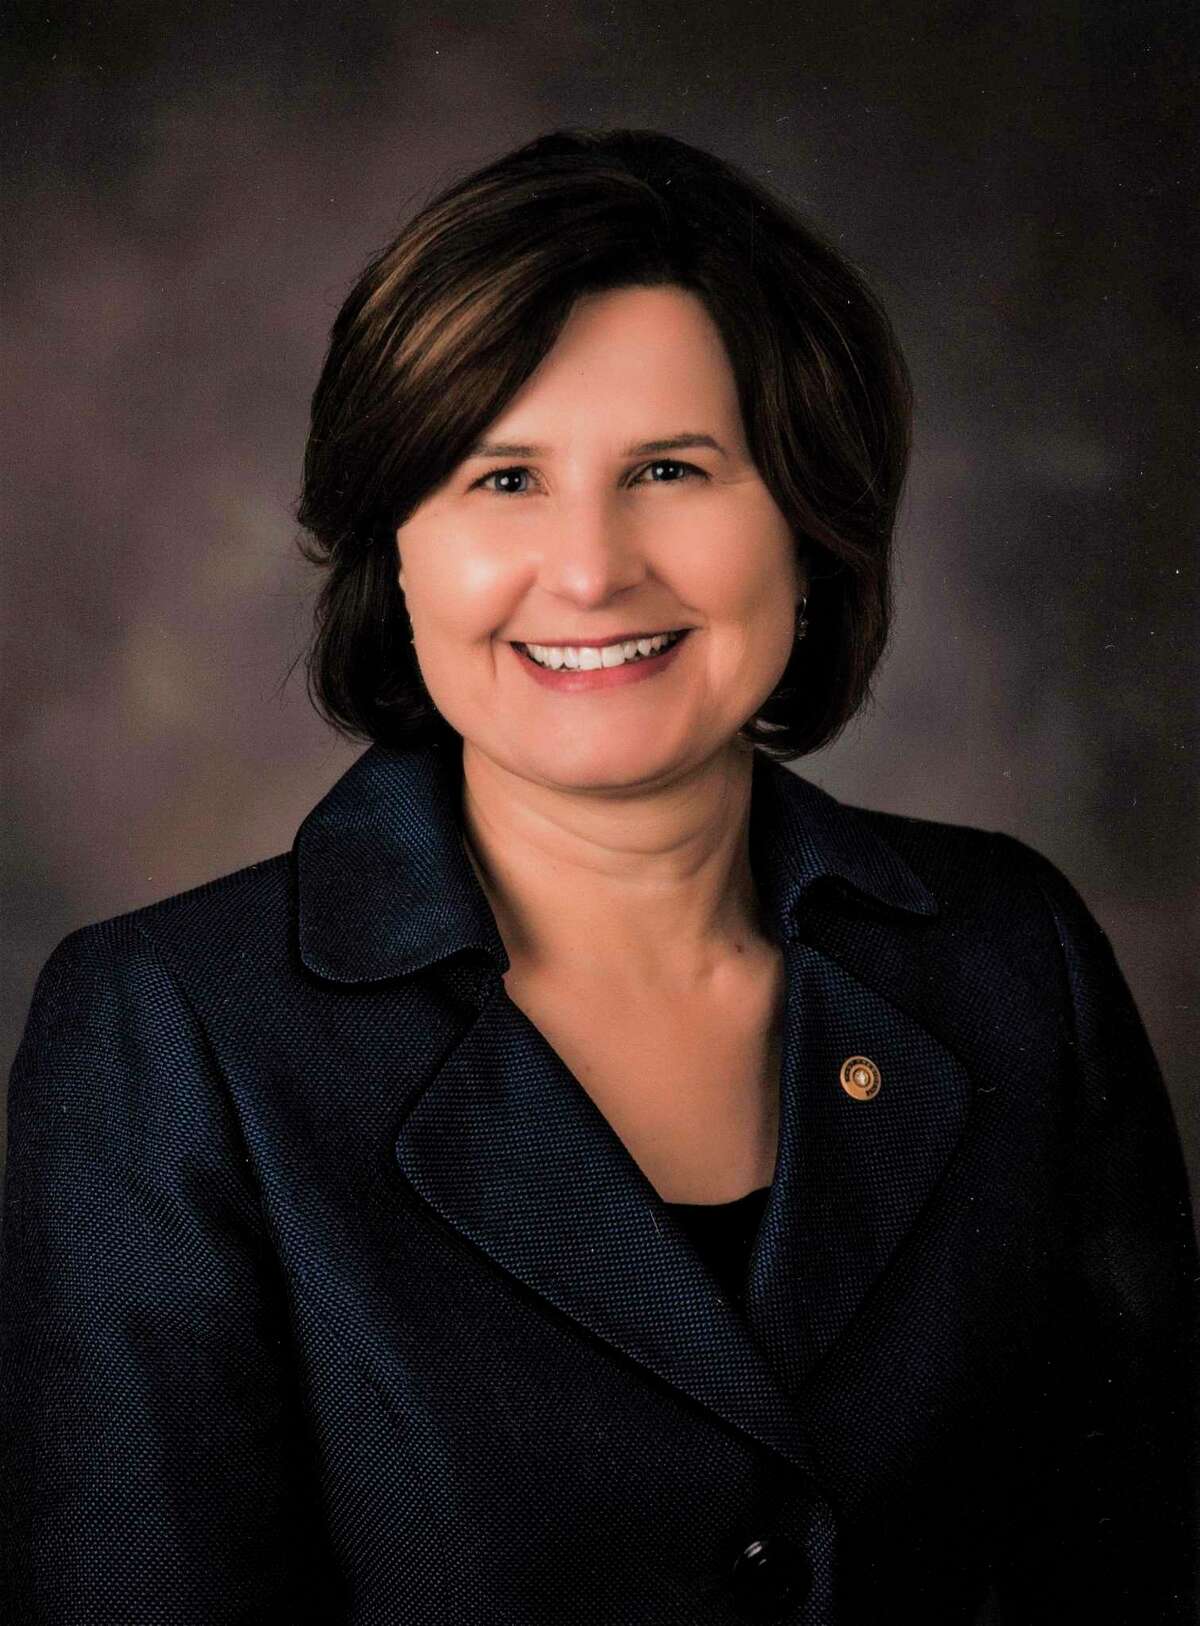 Jenée Velasquez, of Midland, is executive director of The Herbert H. and Grace A. Dow Foundation.